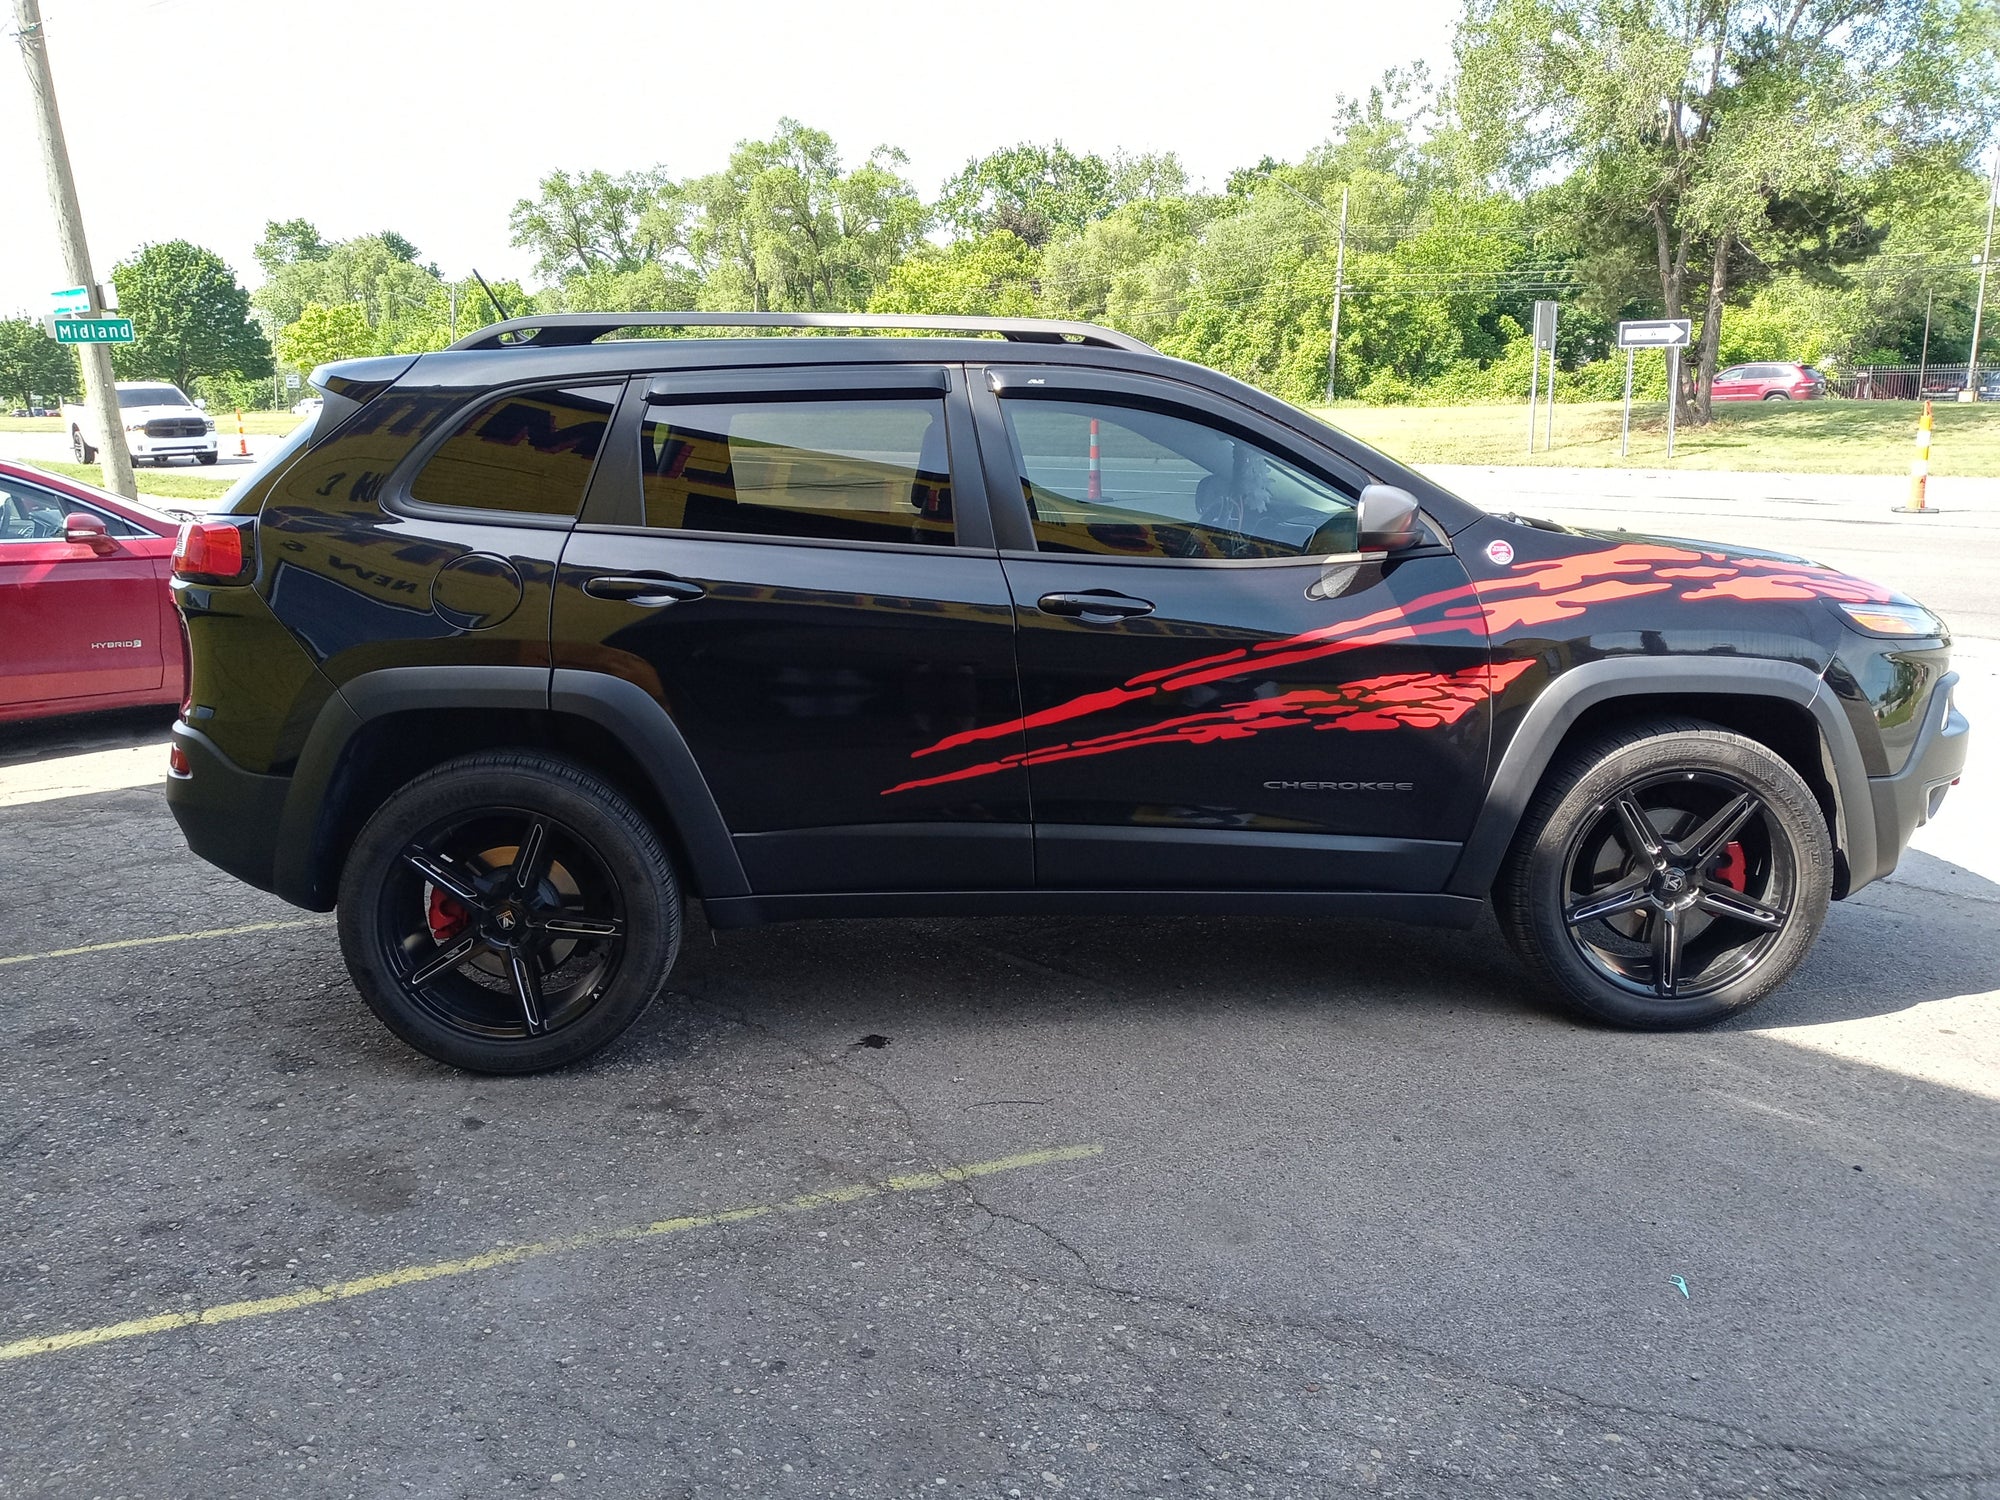 red vinyl cut splash decals on the side of a black Jeep Cherokee